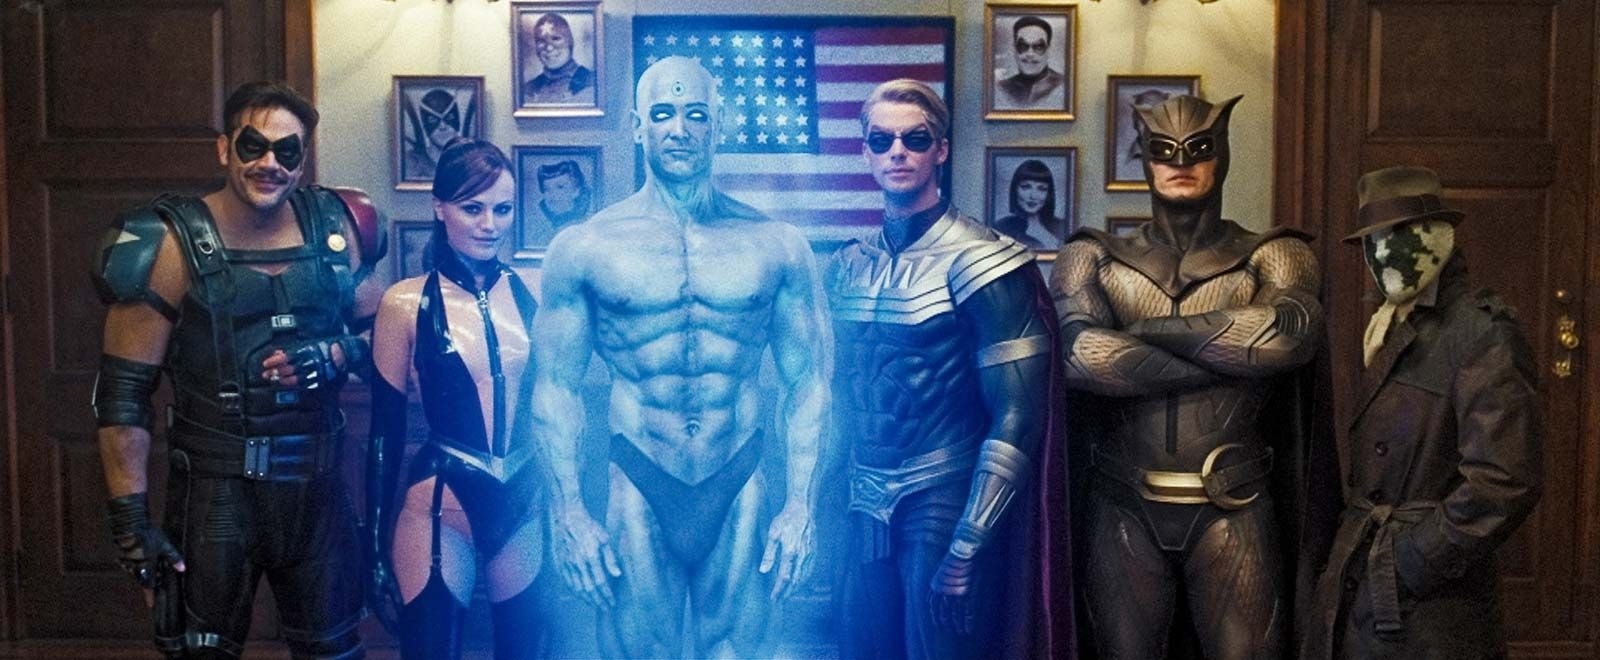 The Watchmen stood in a line, from left to right: The Comedian, Silk Spectre II, Dr Manhattan, Ozymandias, Nite Owl II and Rorschach